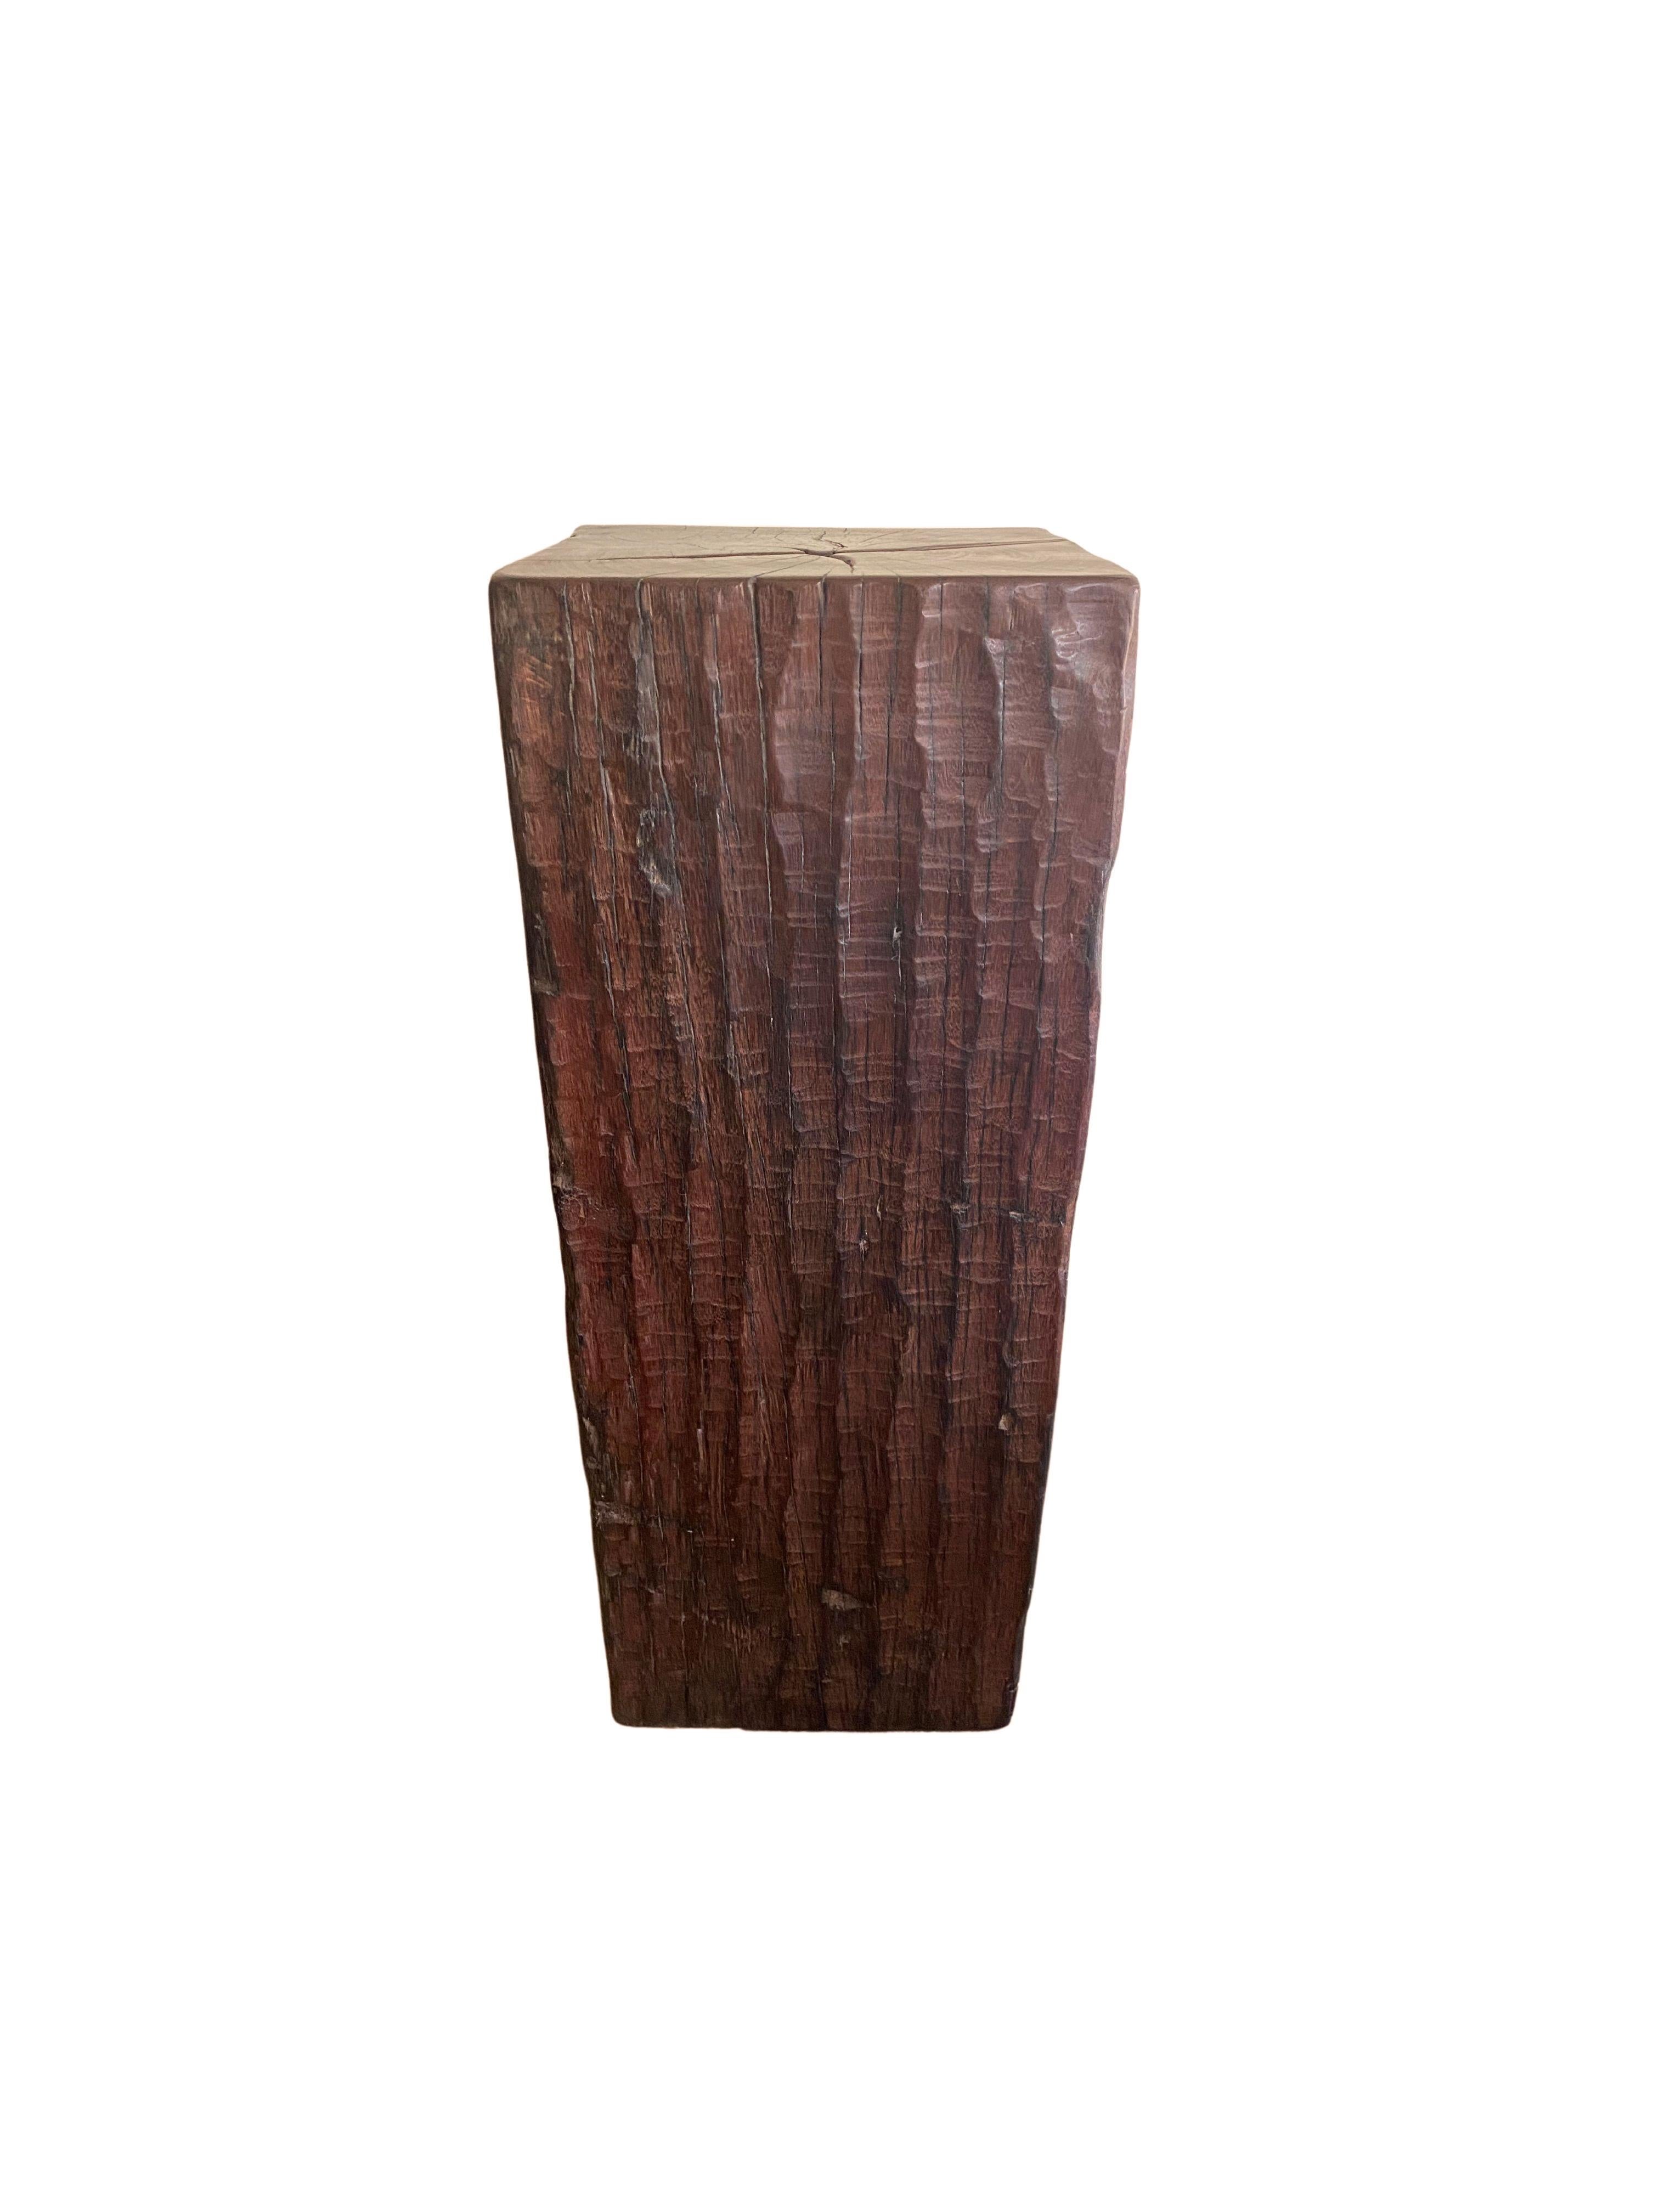 Early 20th Century Solid Iron Wood Pedestal with Stunning Wood Texture For Sale